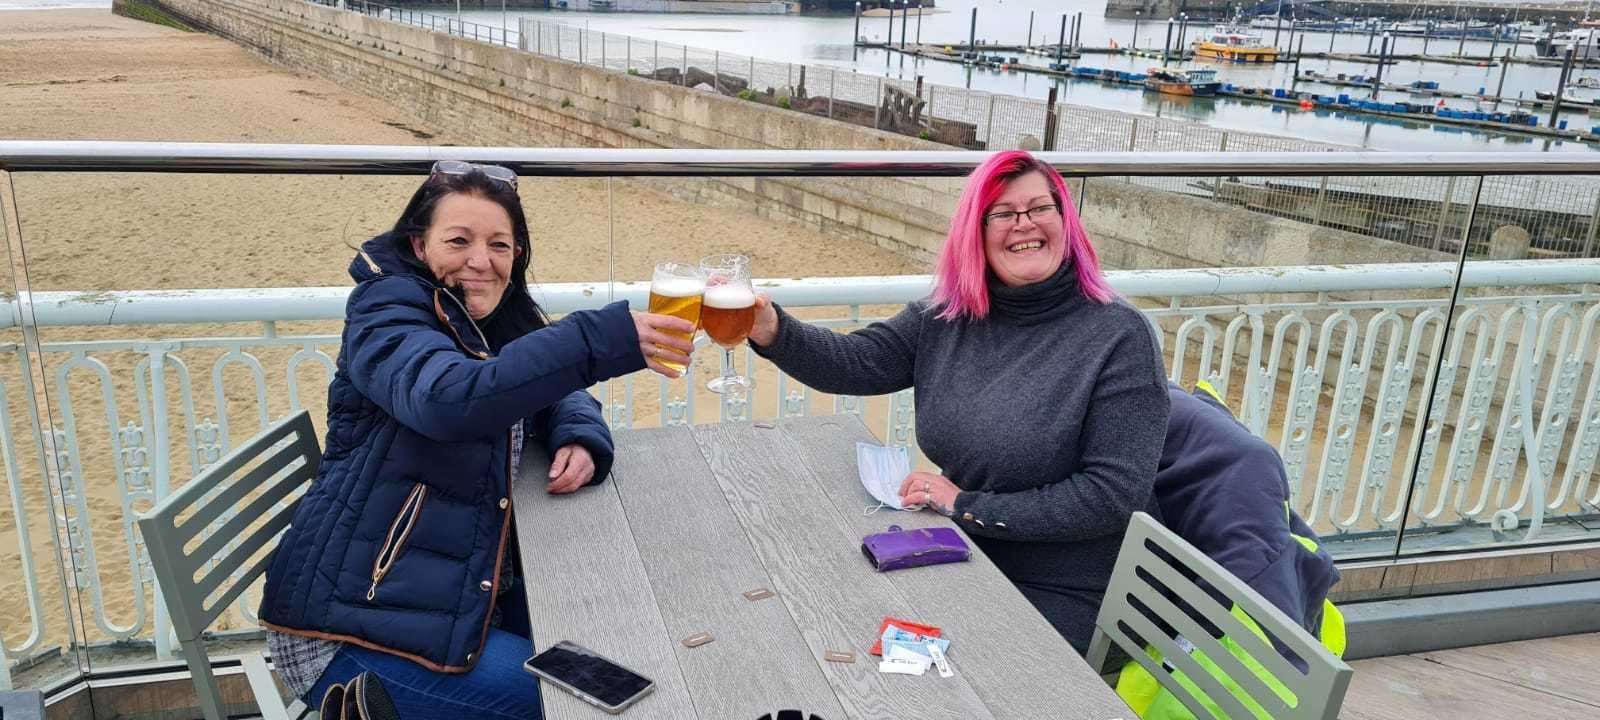 Sue Bell and Pippa Ingram raise a pint with their breakfast at Spoons in Ramsgate